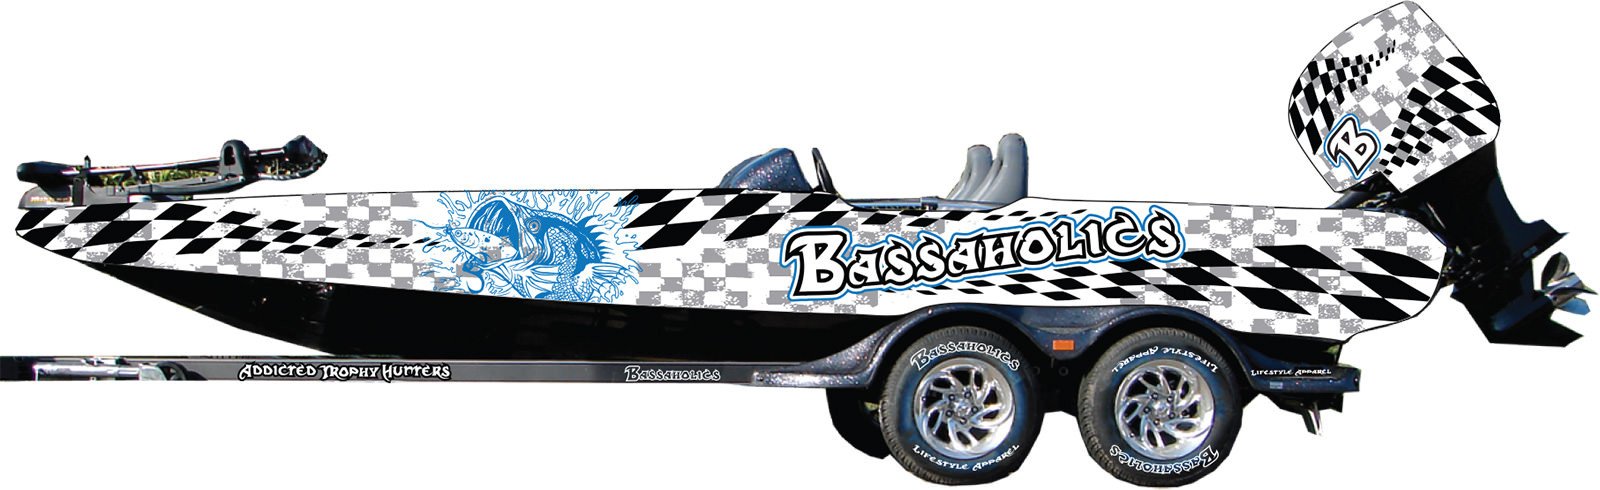 Bass Boat Wraps